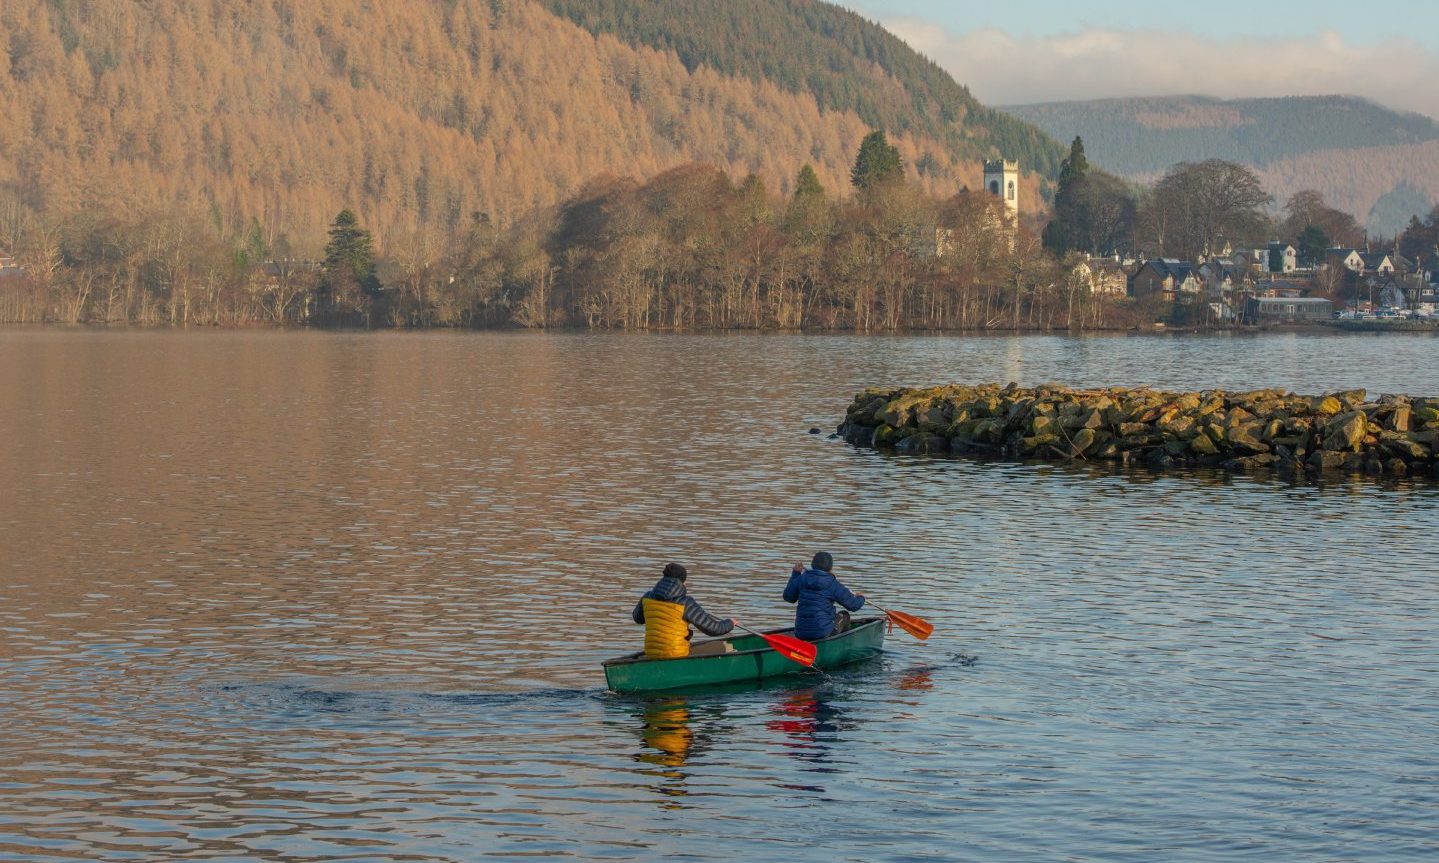 Watersports centre at Loch Tay set to pump millions into economy could be ready by spring